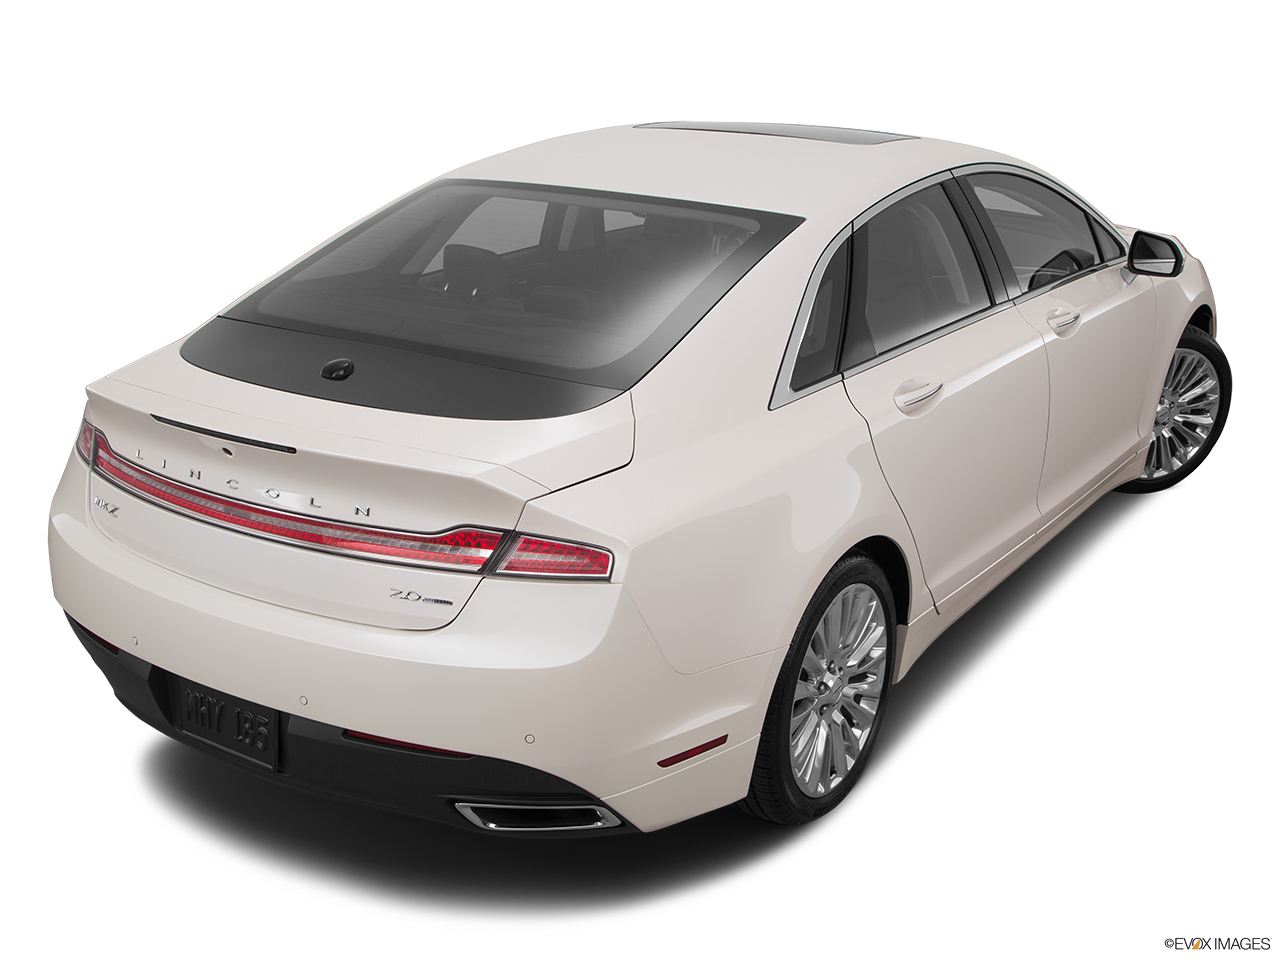 2016 Lincoln MKZ 2.0L EcoBoost FWD Rear 3/4 angle view. 